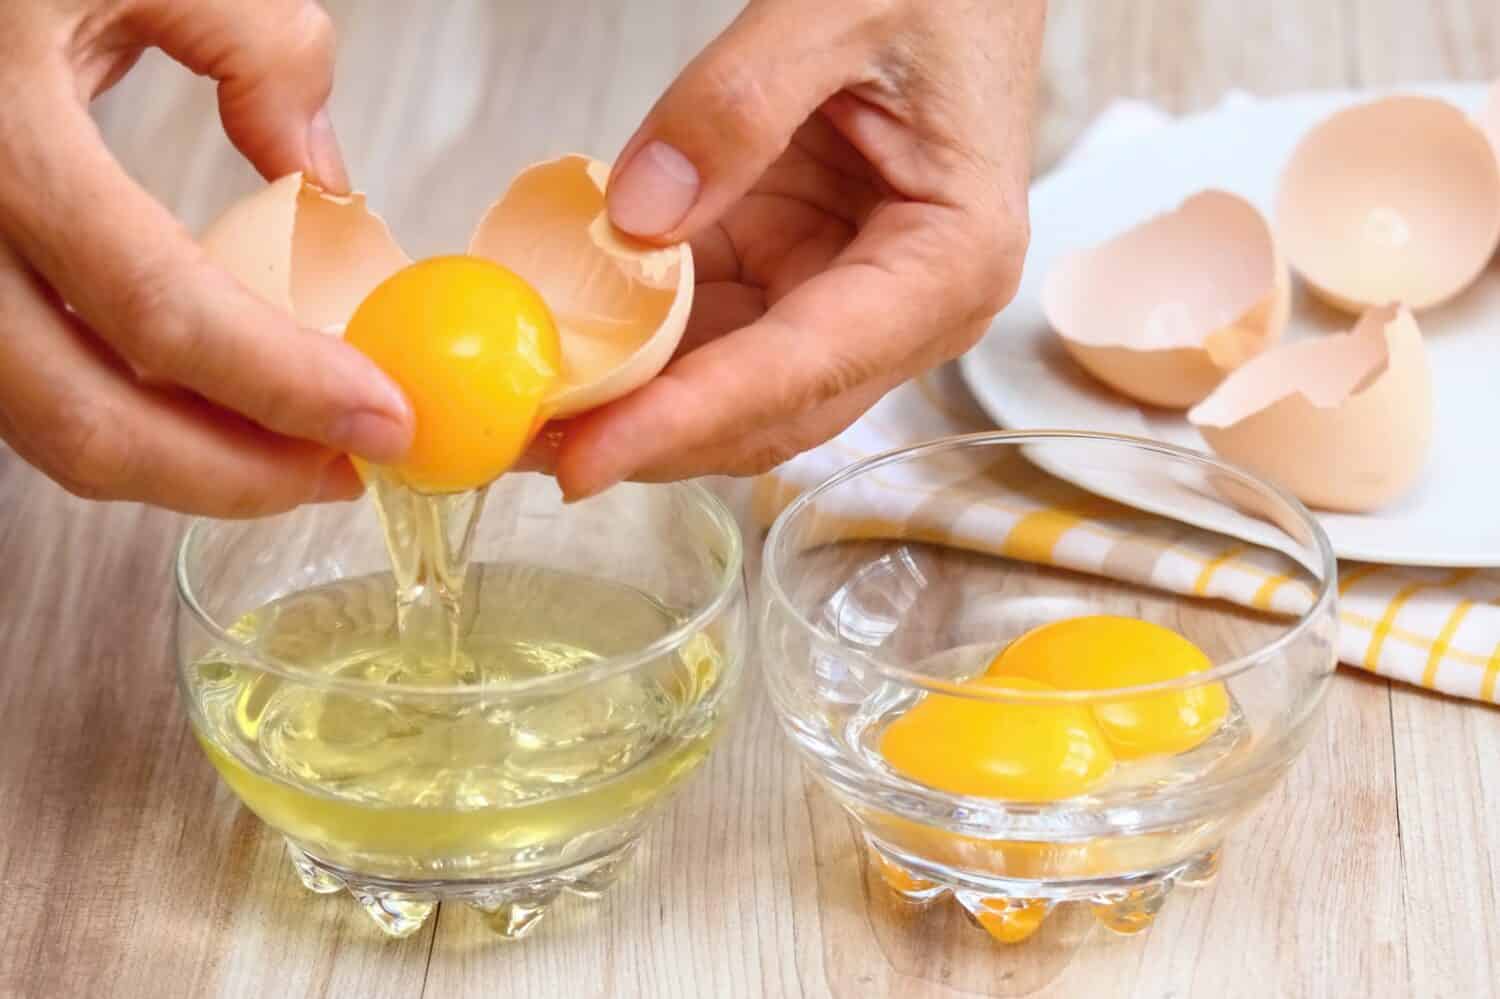 brown vs. white eggs Woman hands breaking an egg to separate egg white and yolks and egg shells at the background